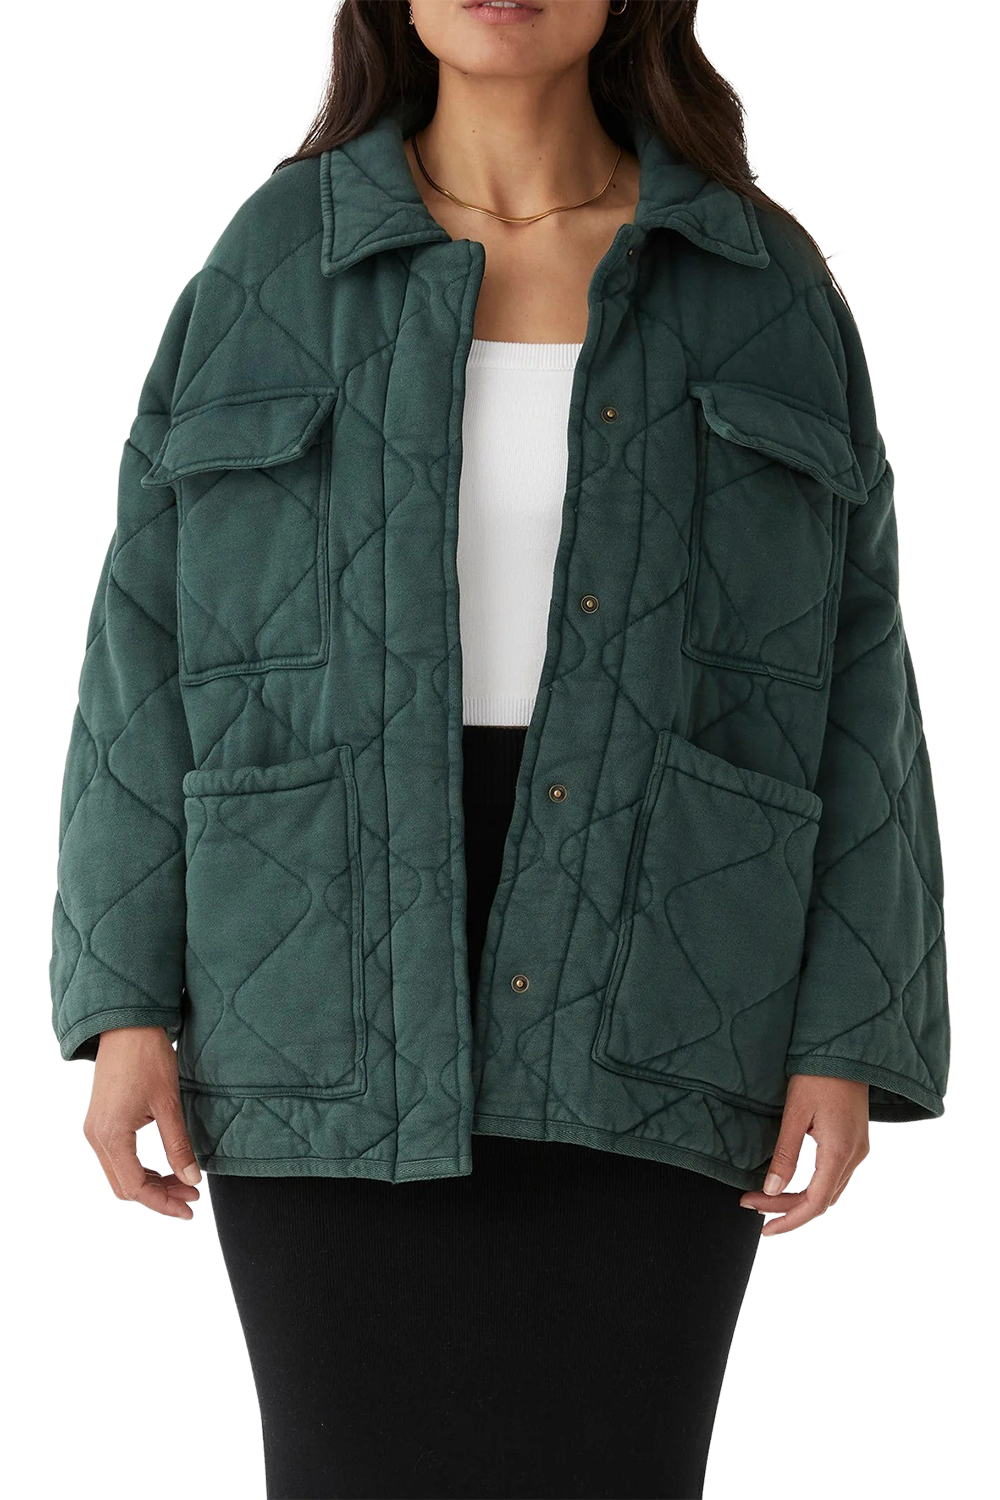 Sia Jacket - Forest